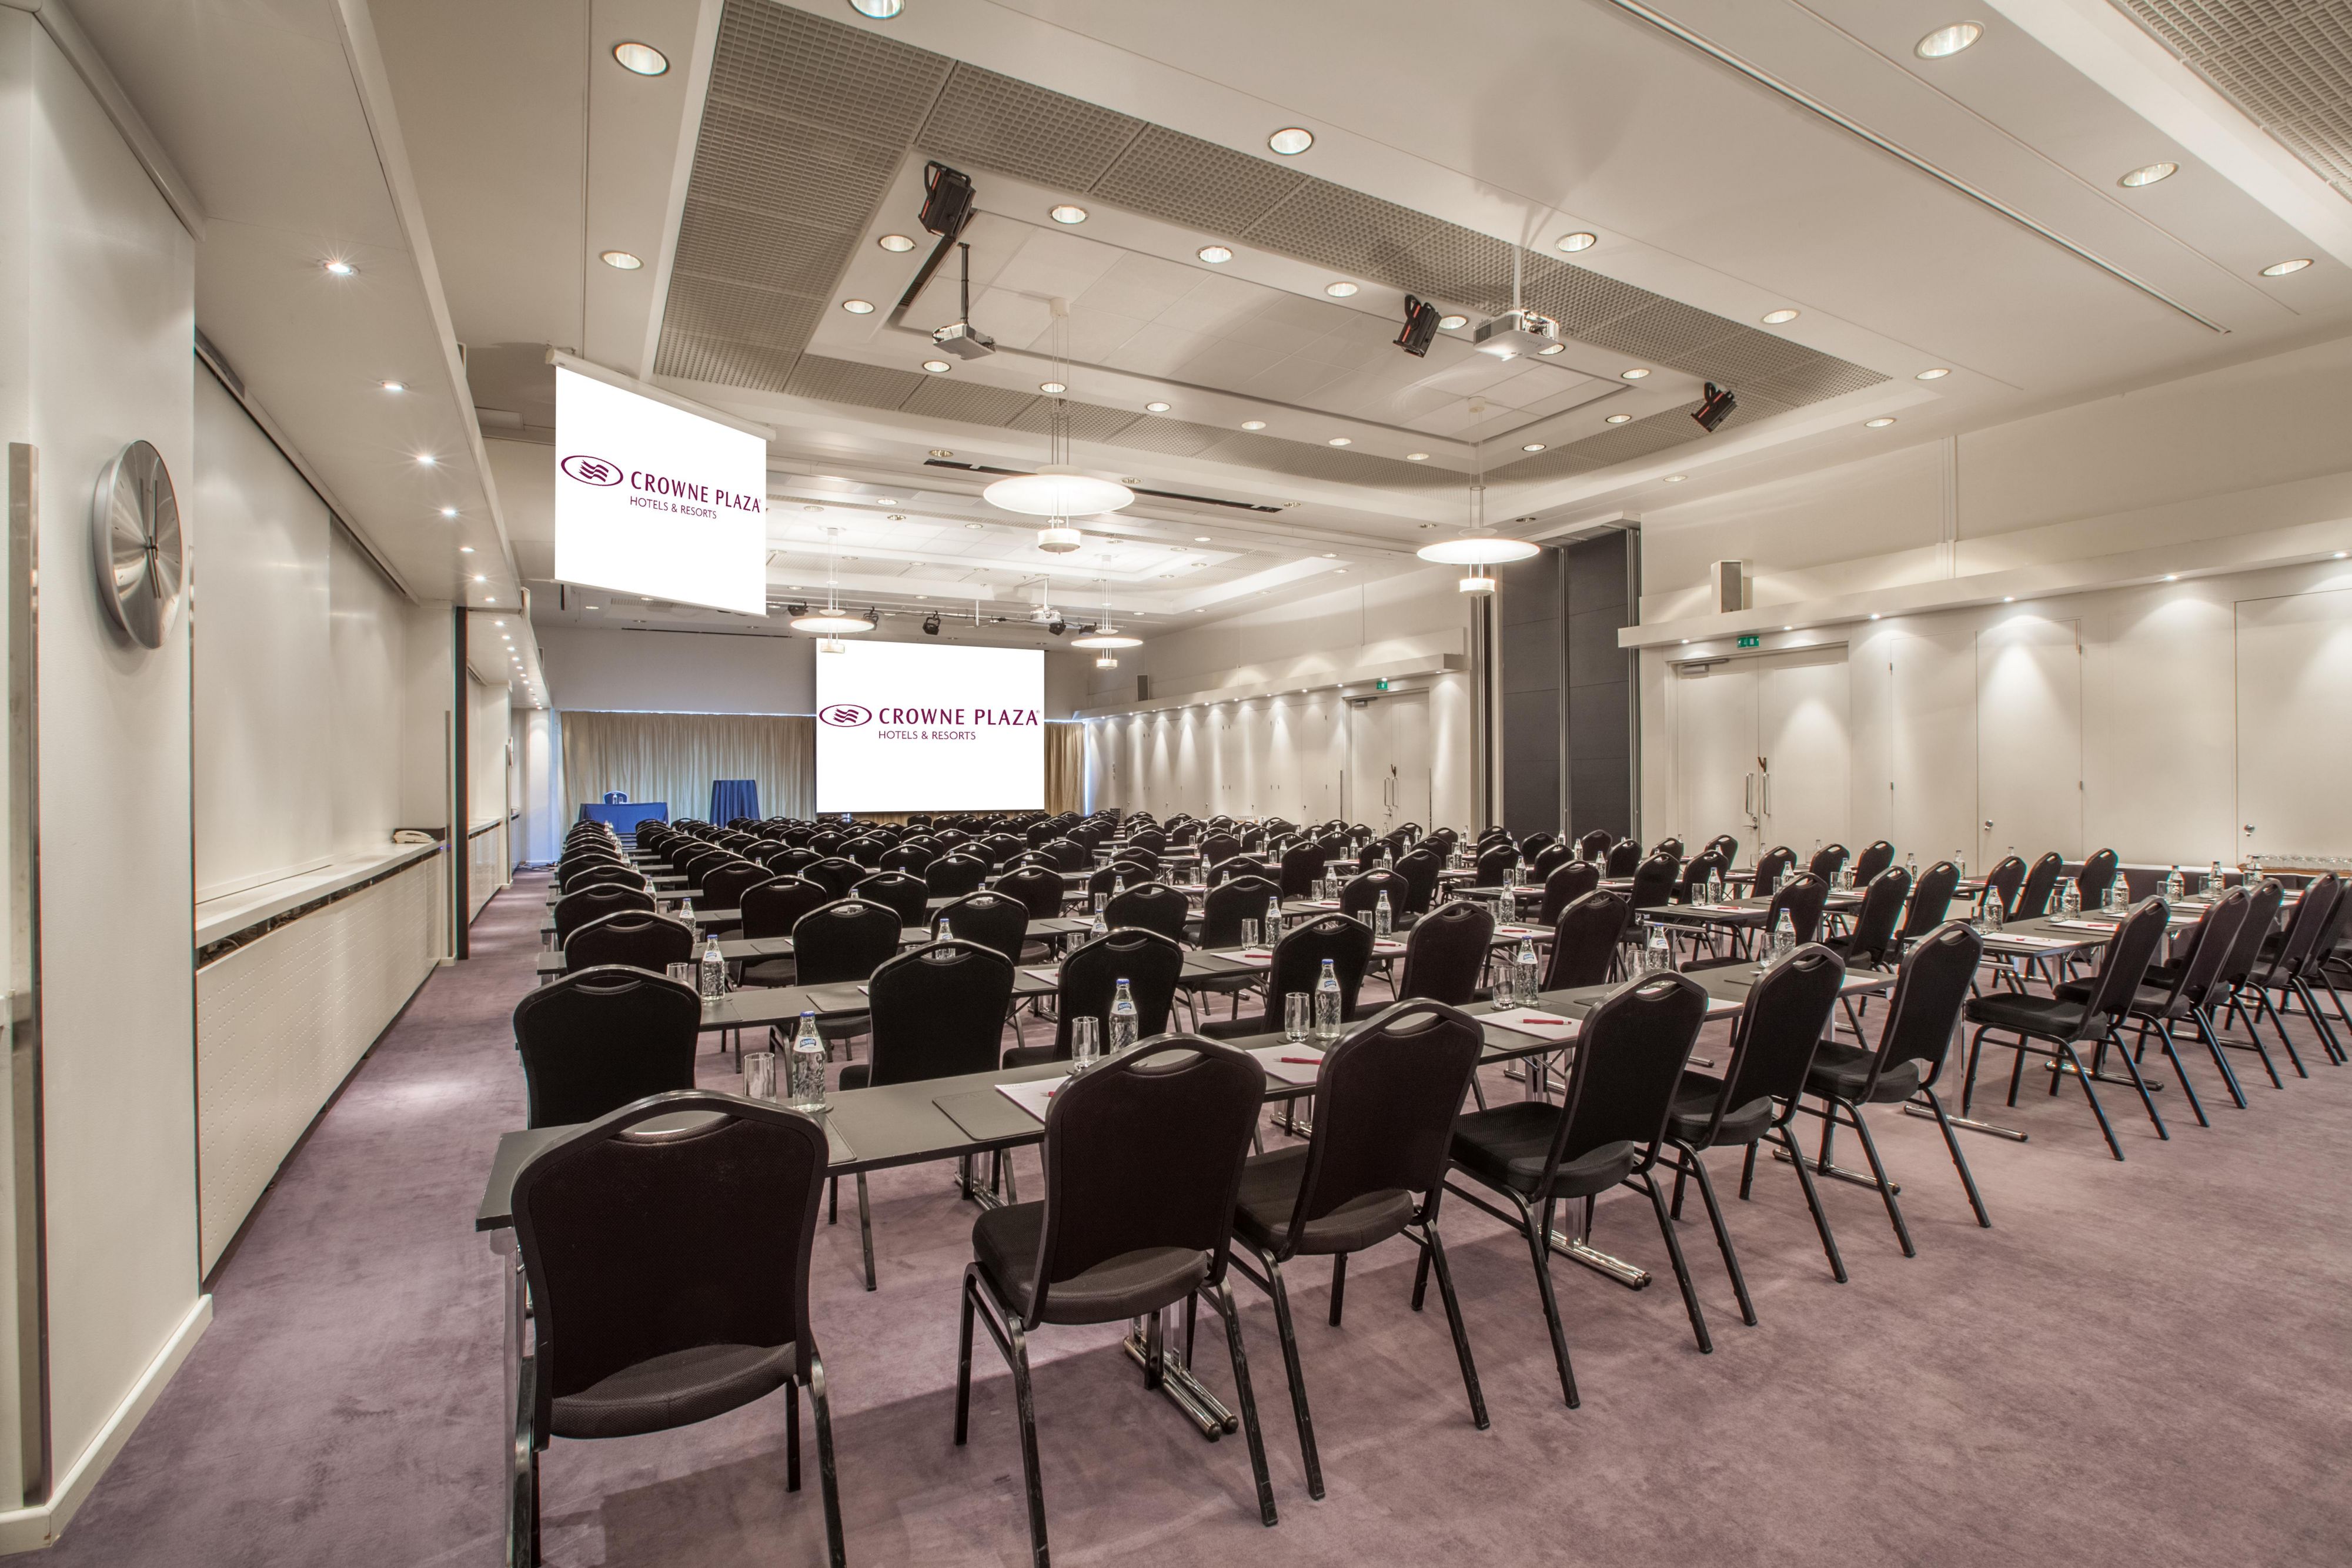 Combining meeting rooms 1 &amp; 2 gives you close to 300 m2 space